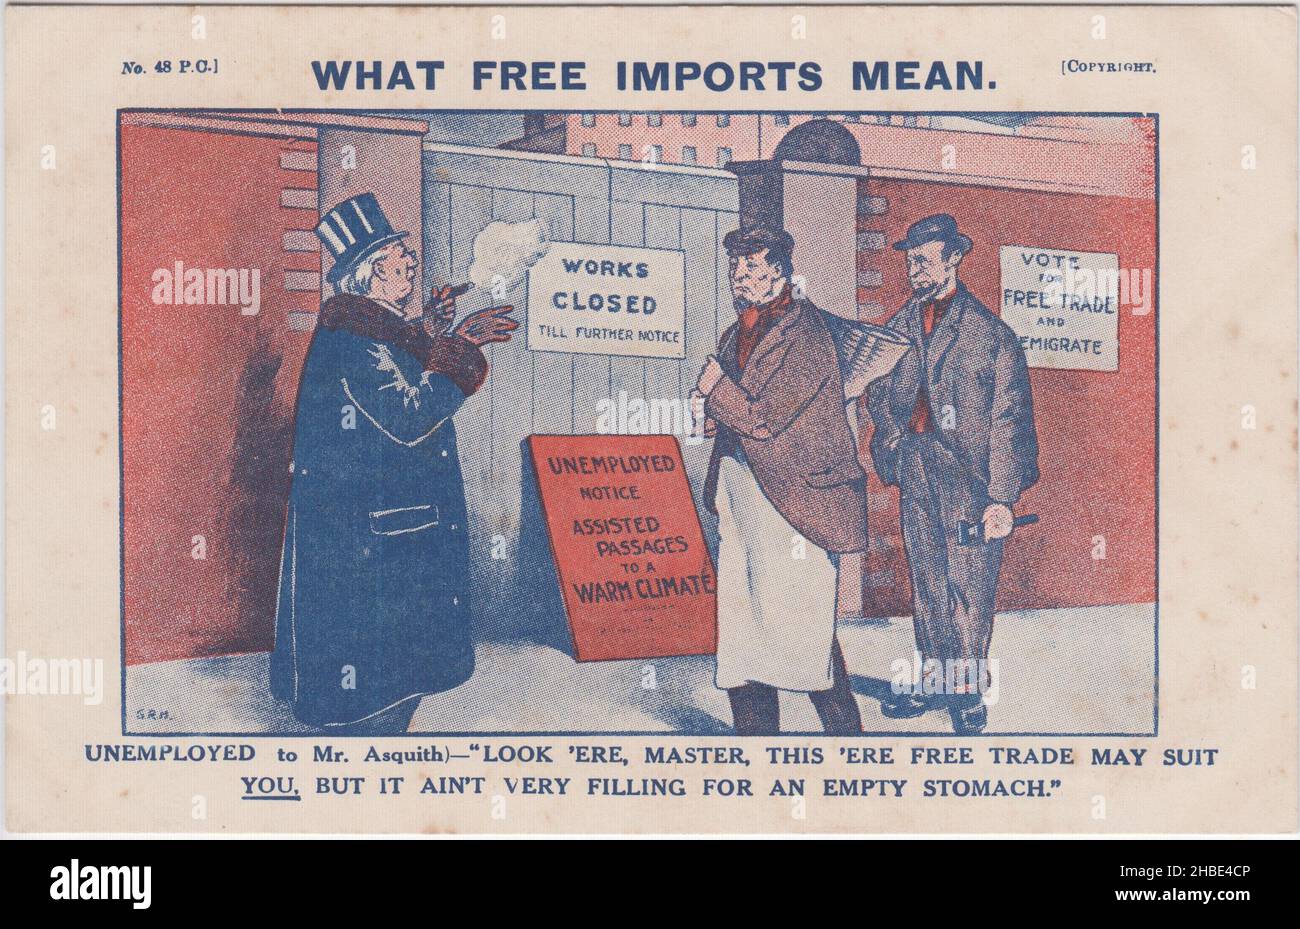 'What free imports mean'. 'Unemployed to Mr Asquith - 'Look 'ere, Master, this 'ere free trade may suit YOU, but it ain't very filling for an empty stomach'. Cartoon showing two unemployed workers standing outside closed factory gates, in conversation with Liberal Party leader H. H. Asquith. In the background are notices saying 'Vote for free trade & emigrate' & 'Unemployed notice. Assisted passages to a warm climate'. Early 20th century postcard published by the National Union of Conservative & Constitutional Associations Stock Photo